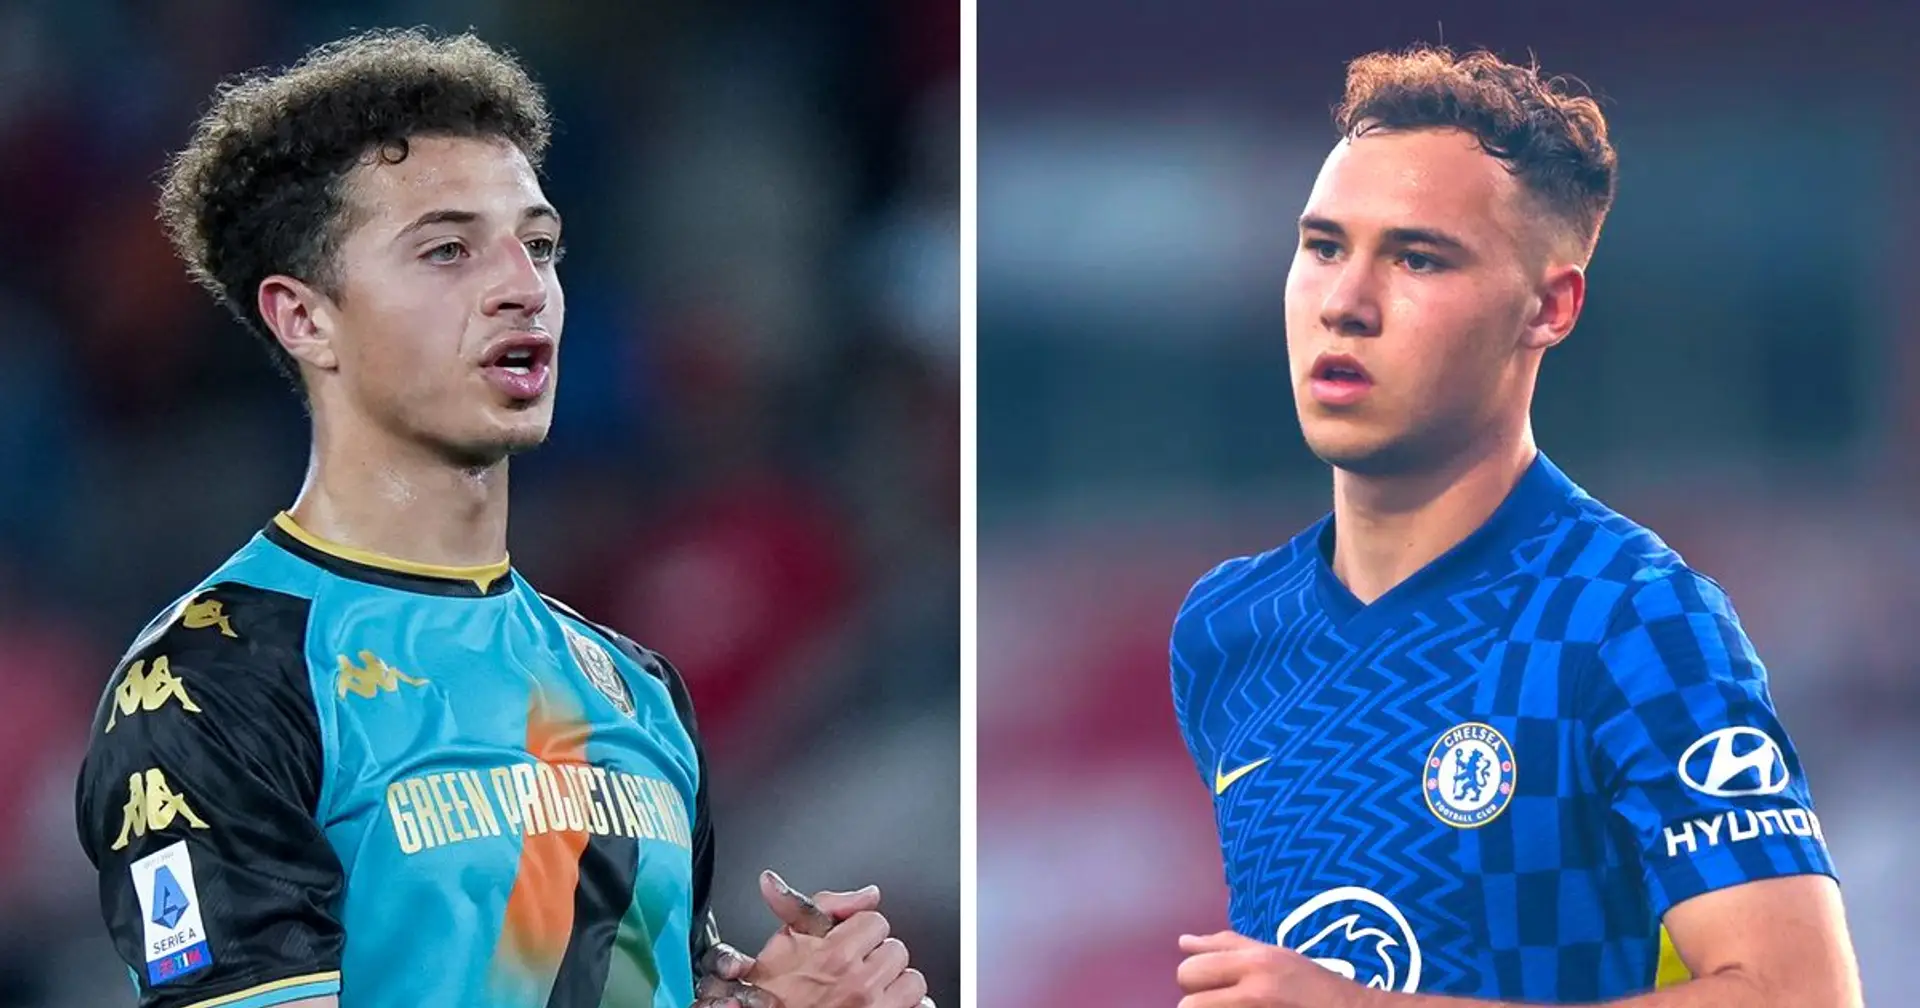 7 Chelsea Academy products who may break through into first team next season: in images